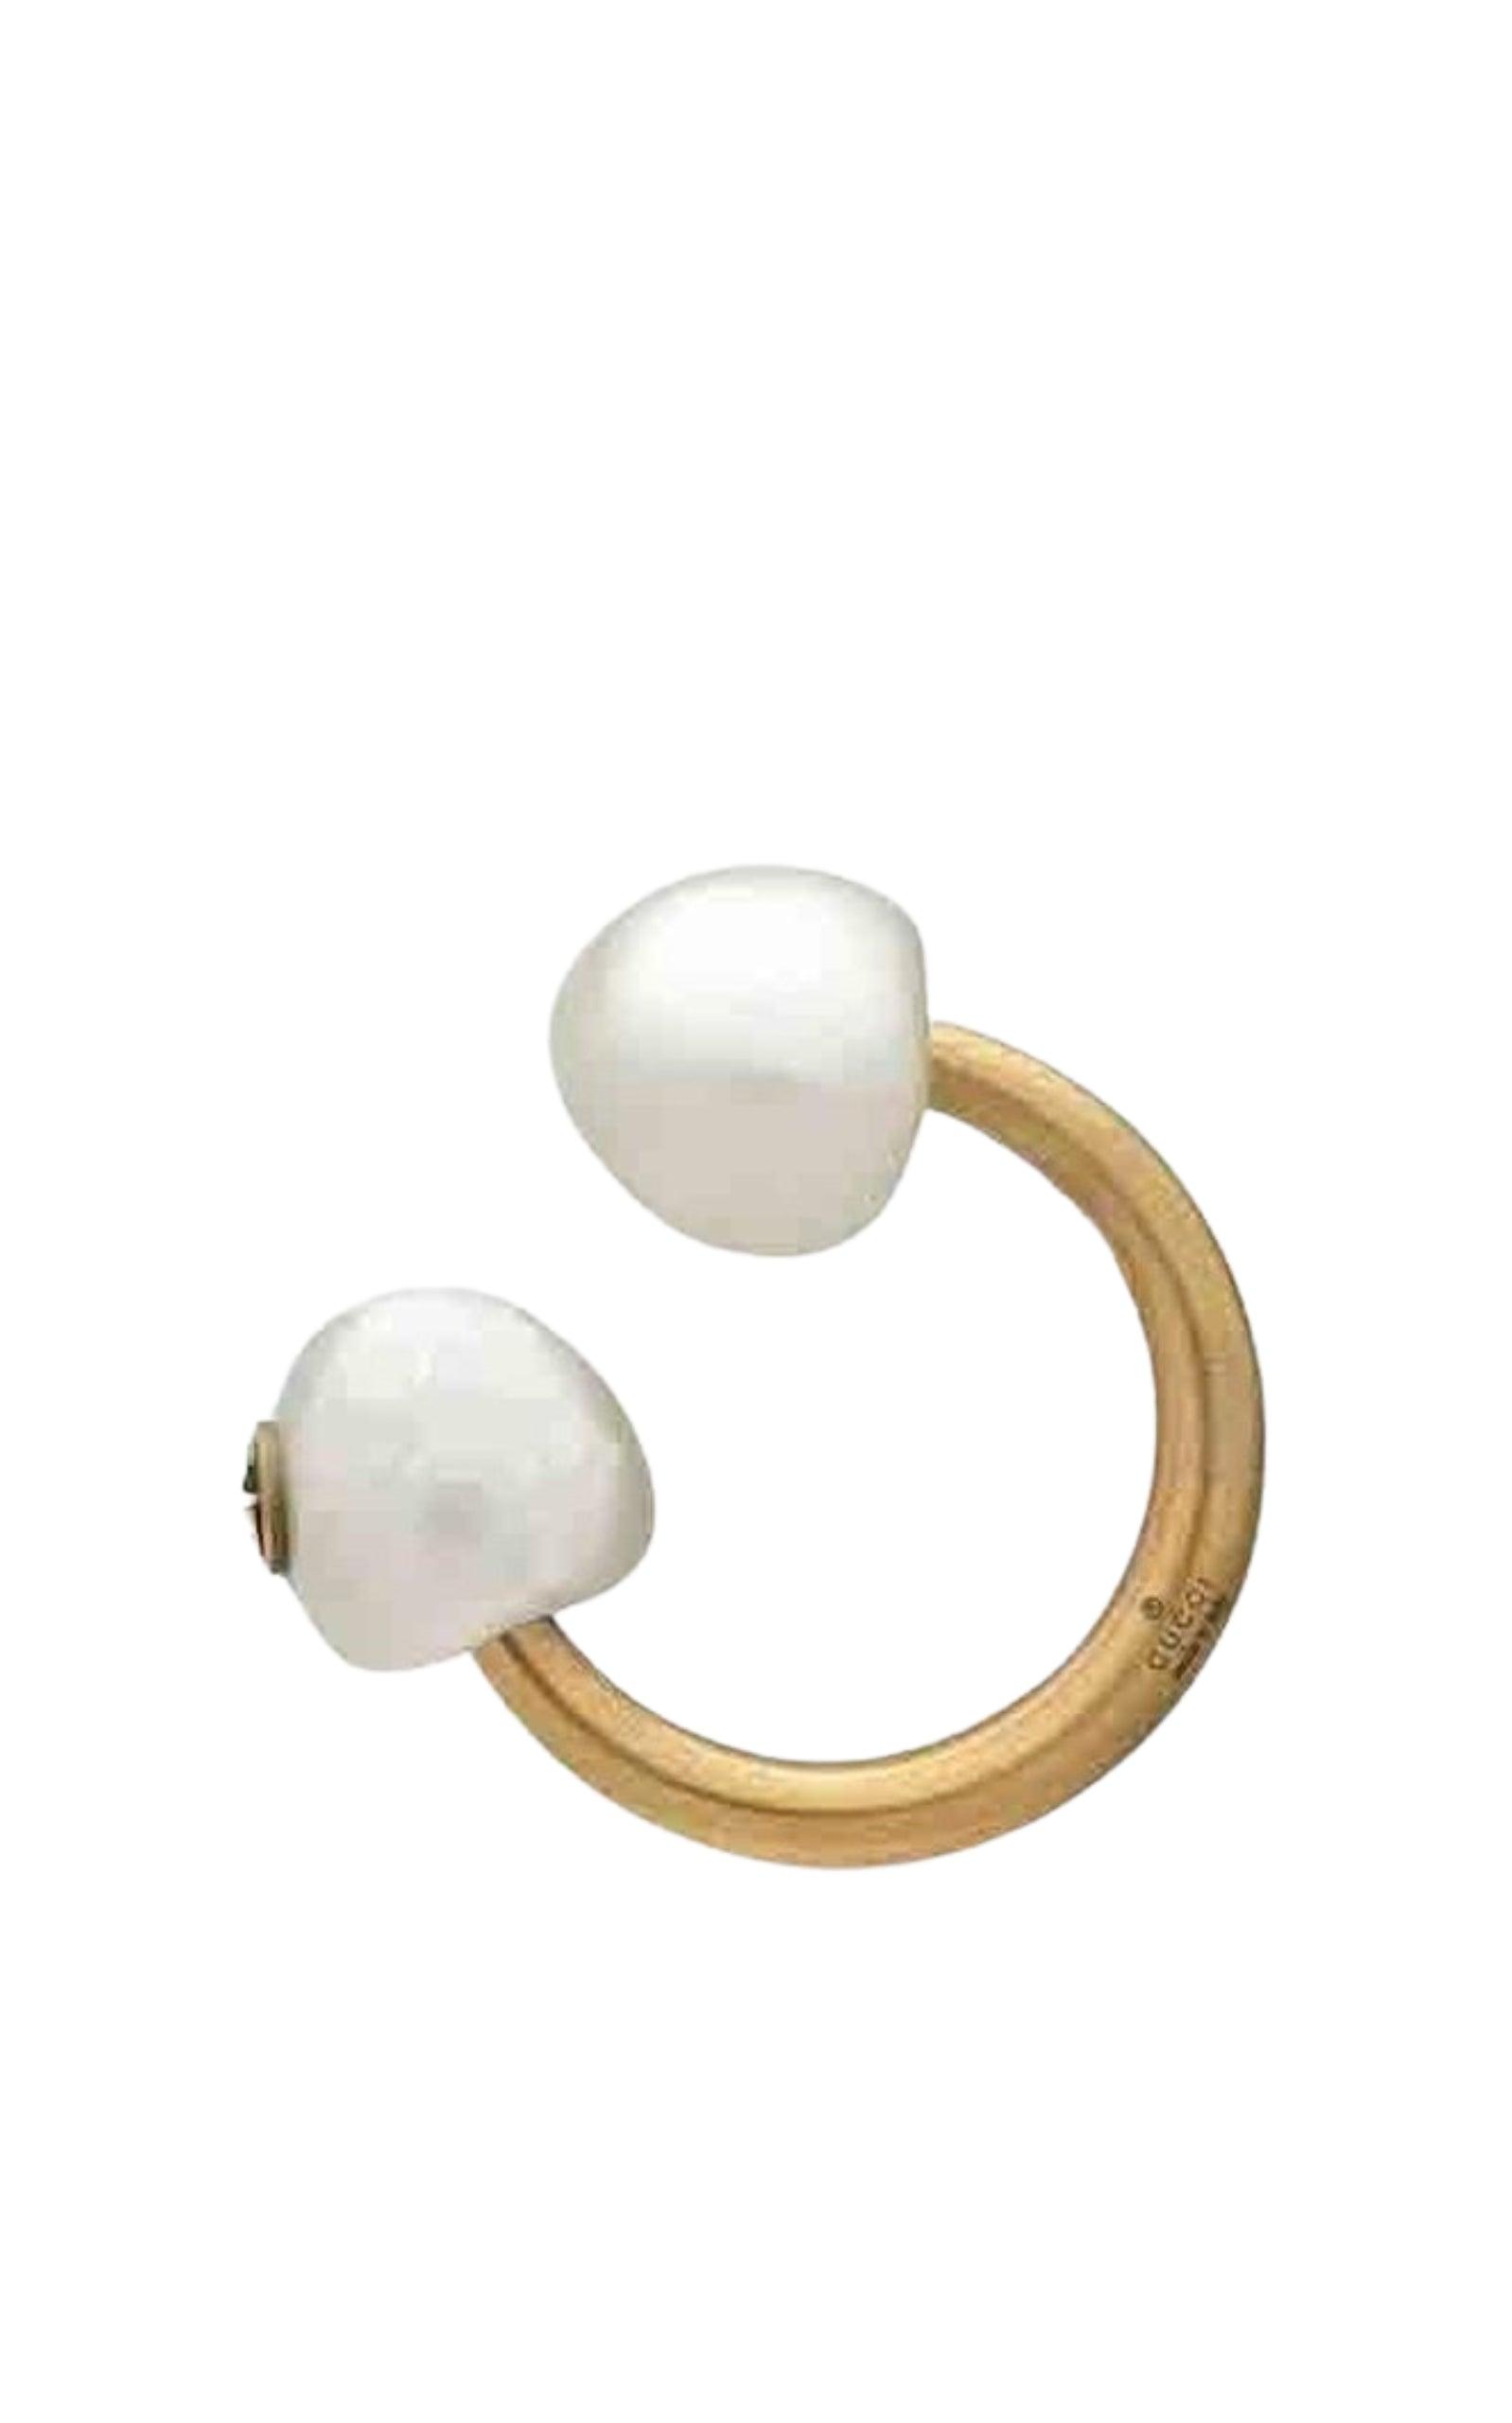  GucciSingle Earring with Pearls in Gold - Runway Catalog